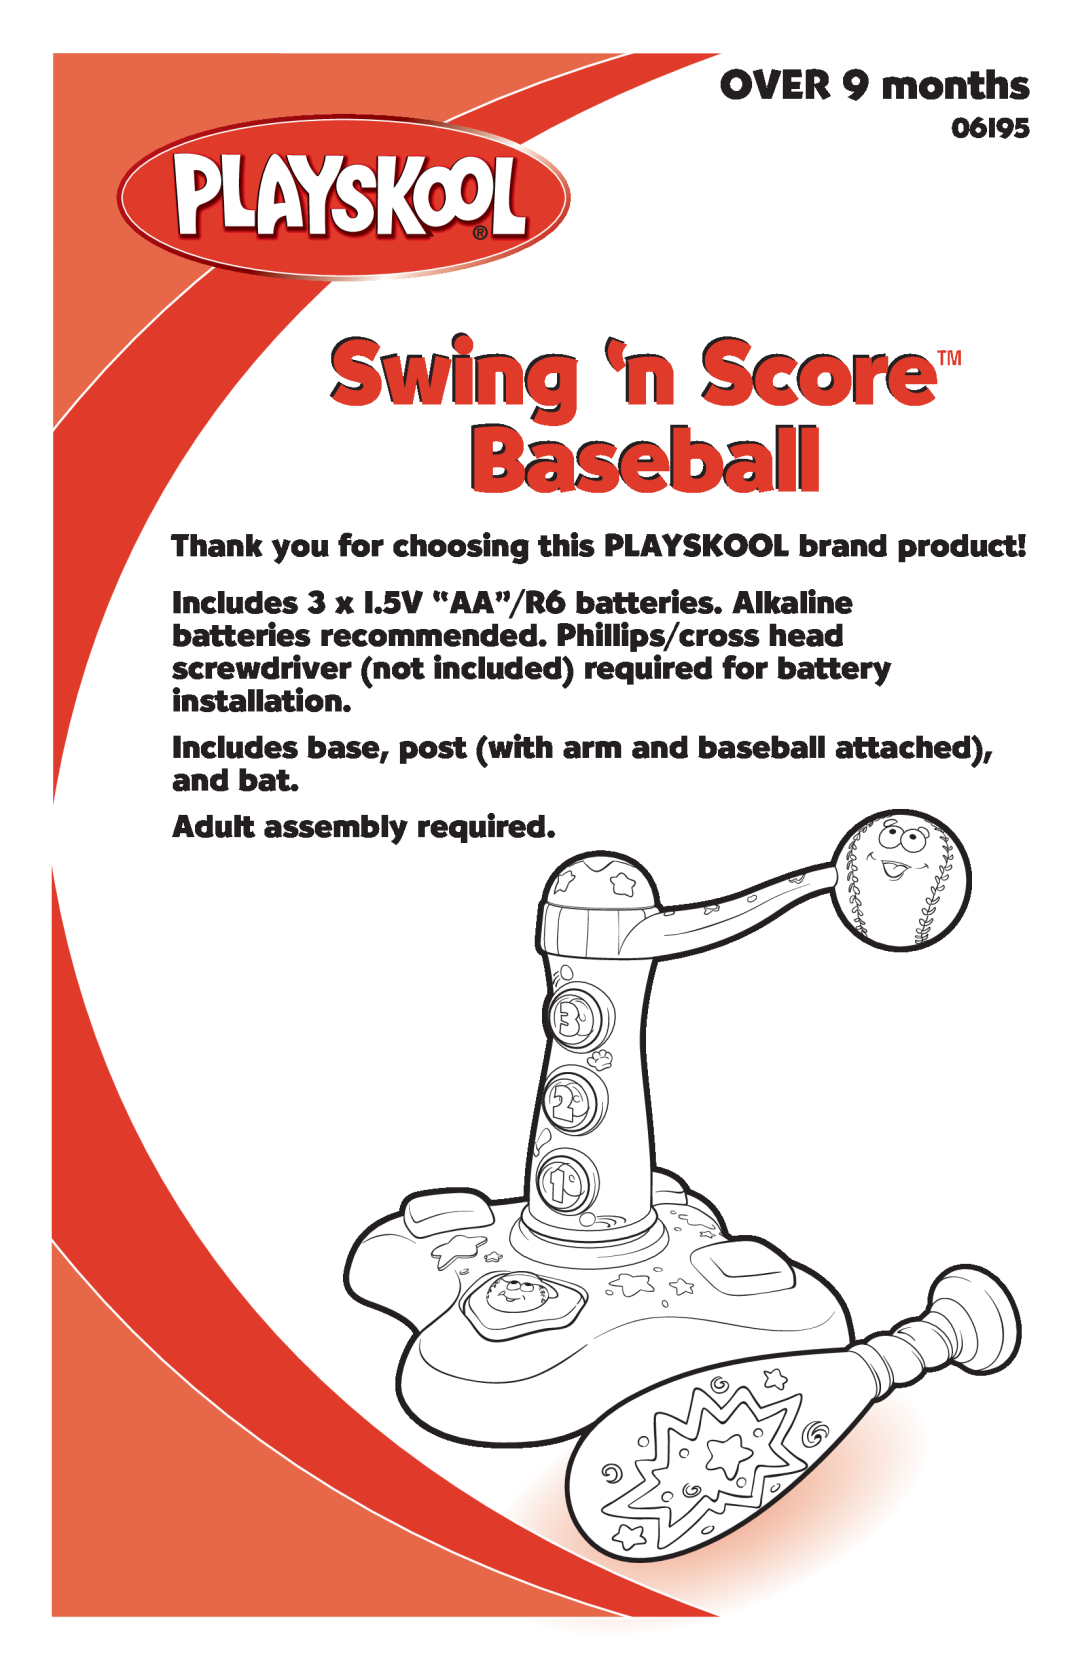 Hasbro 06195 manual Swing ‘n Score Baseball, OVER 9 months, Thank you for choosing this PLAYSKOOL brand product 